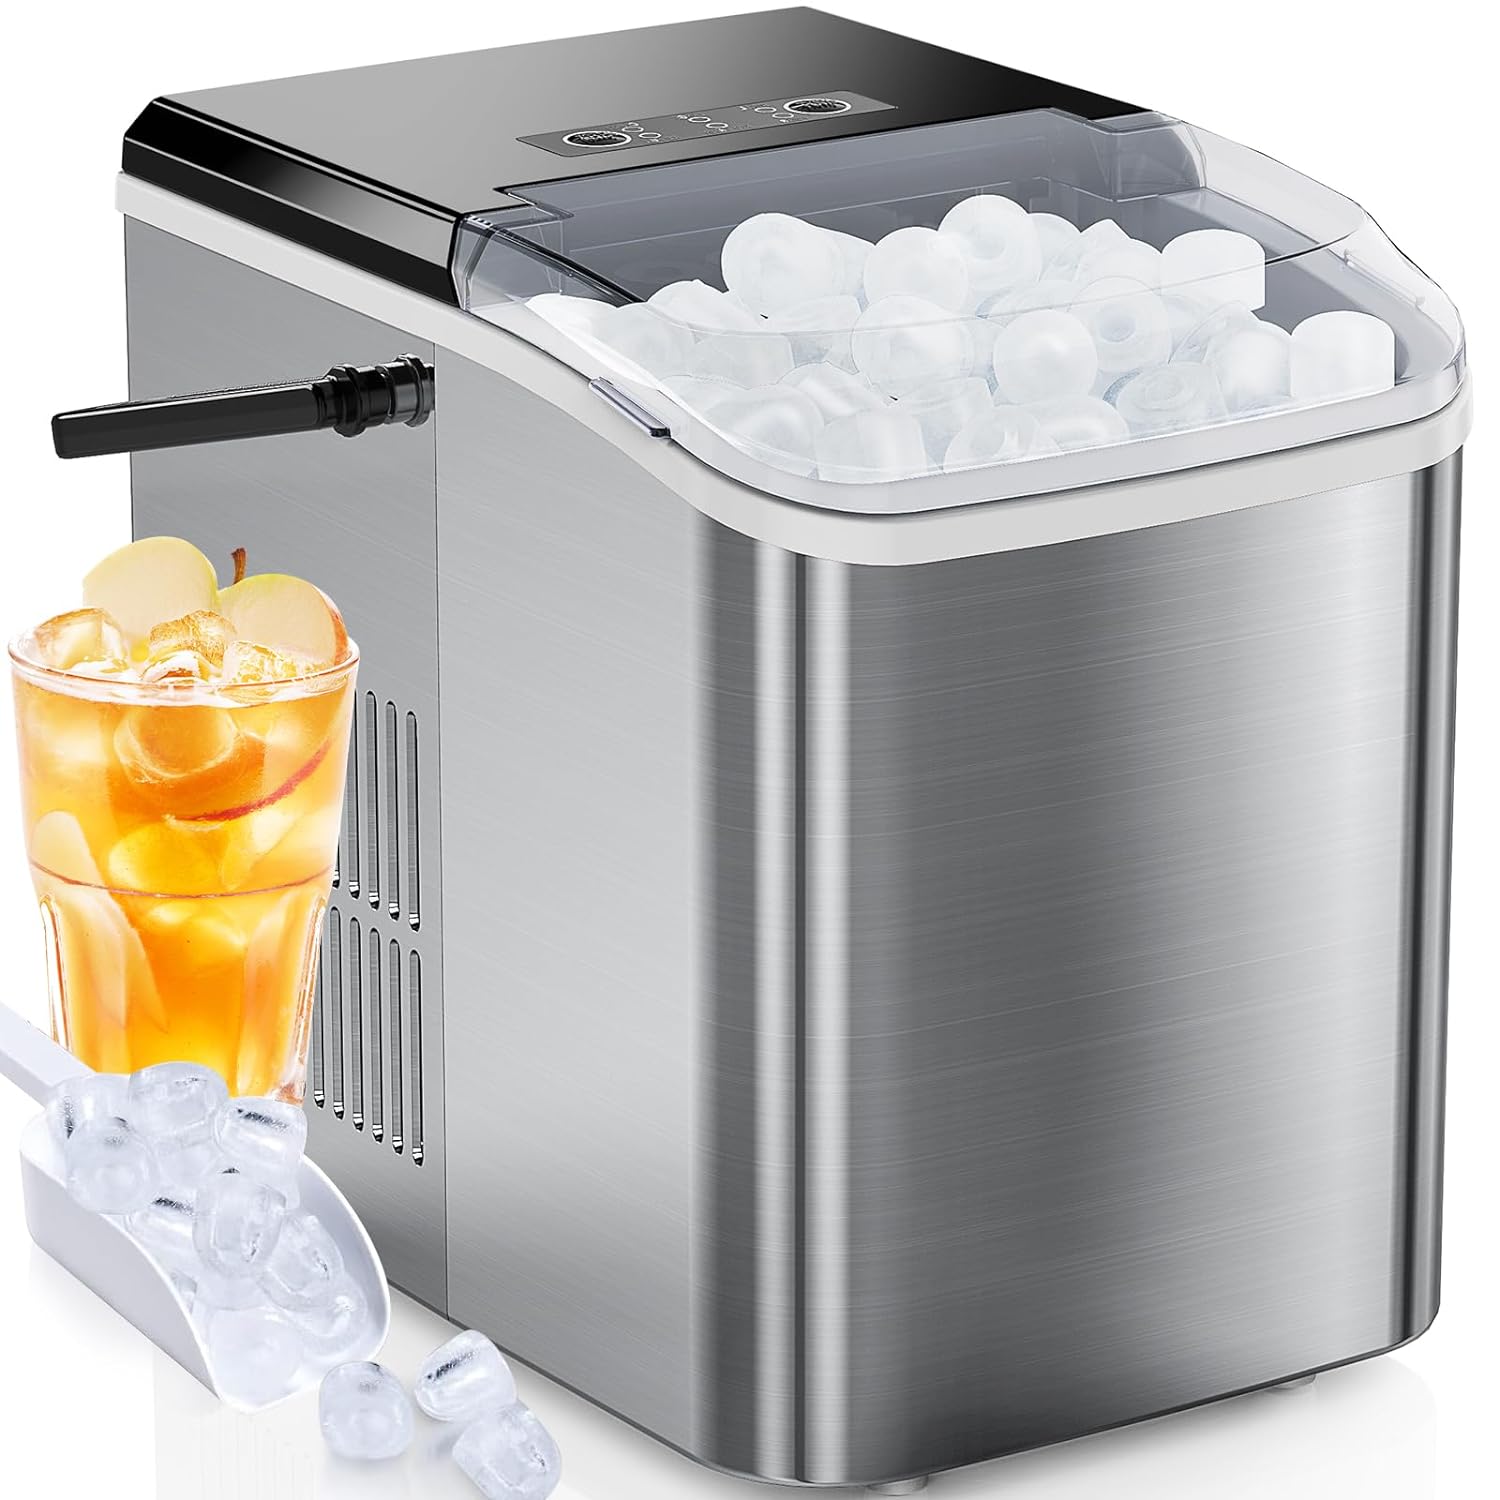 I use it a lot! It' affordable and of high quality. Ice cubes soften when water is added so you won't hurt your teeth when chewing them!